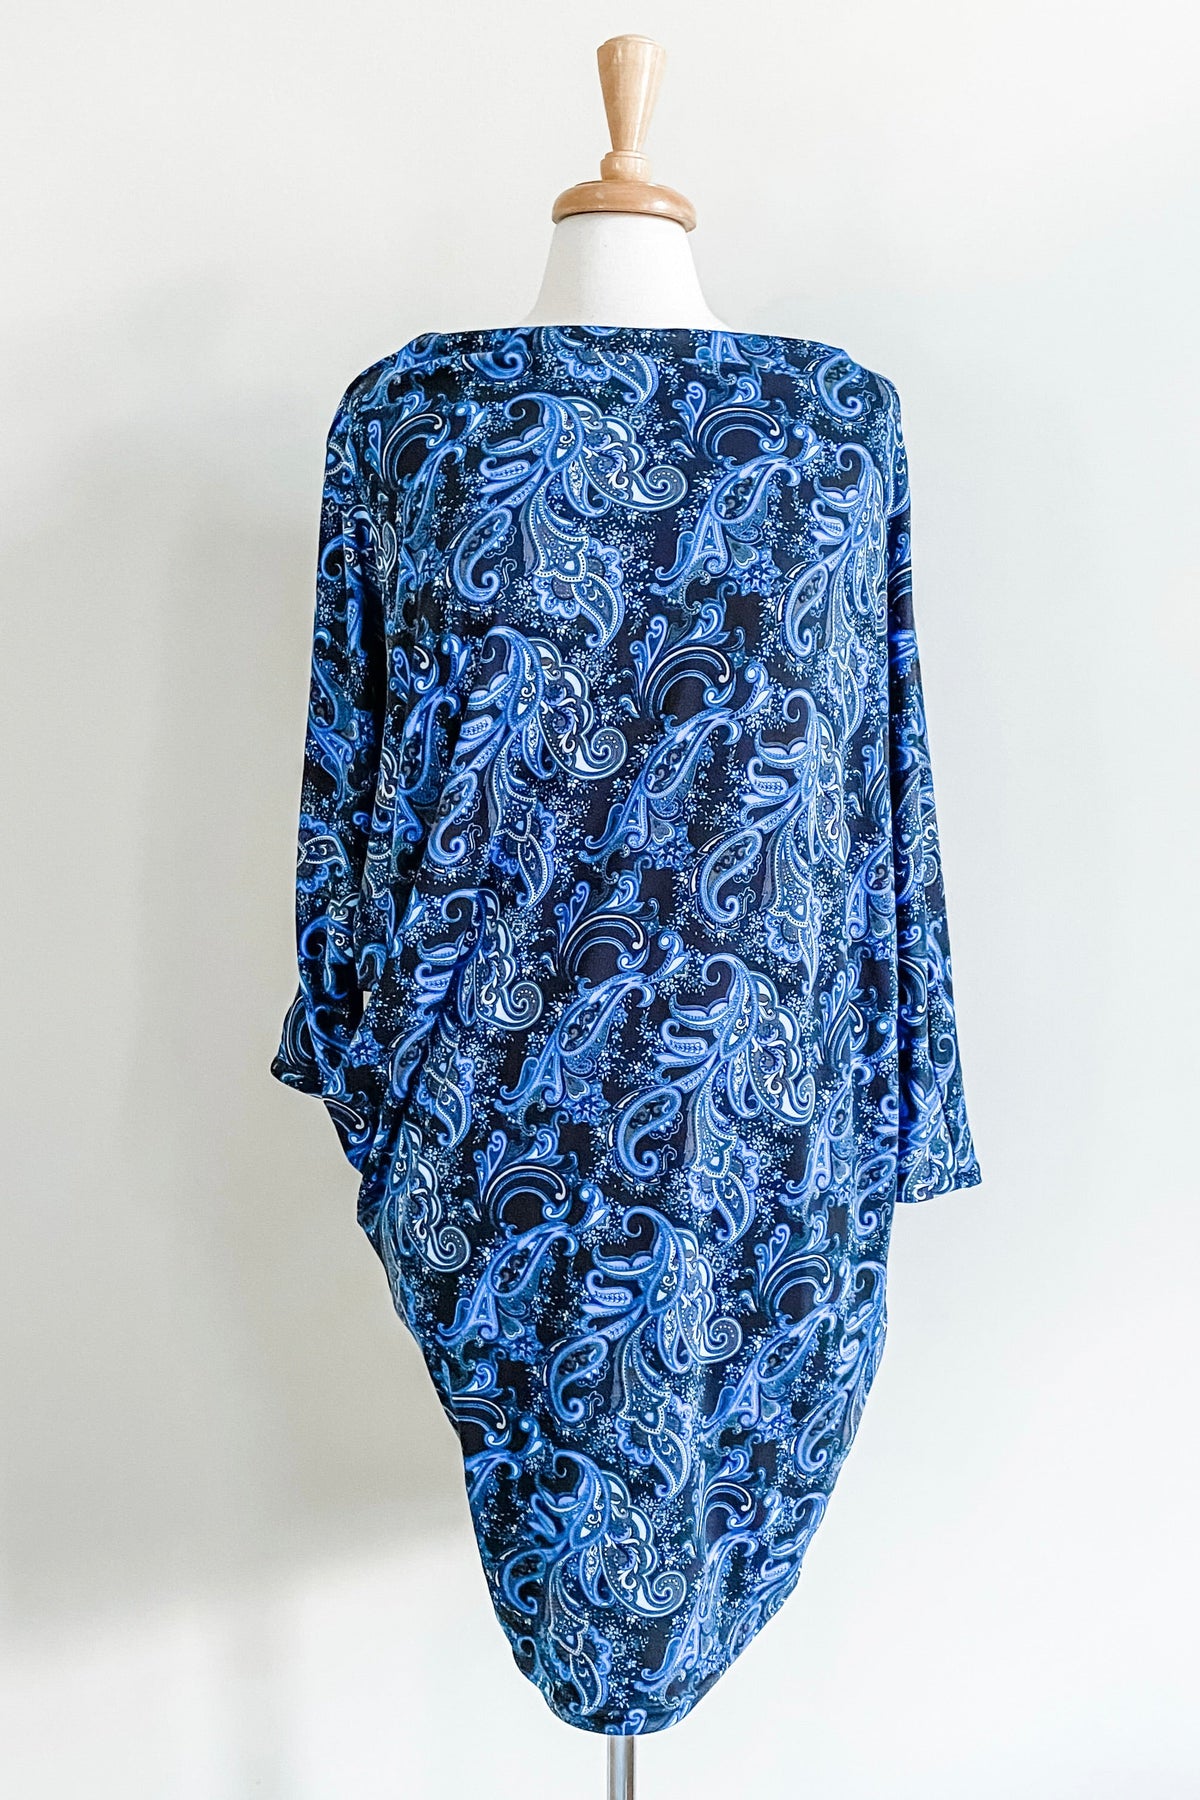 Diane Kroe Origami Dress (Blue Paisley) - The Classic Capsule Collection